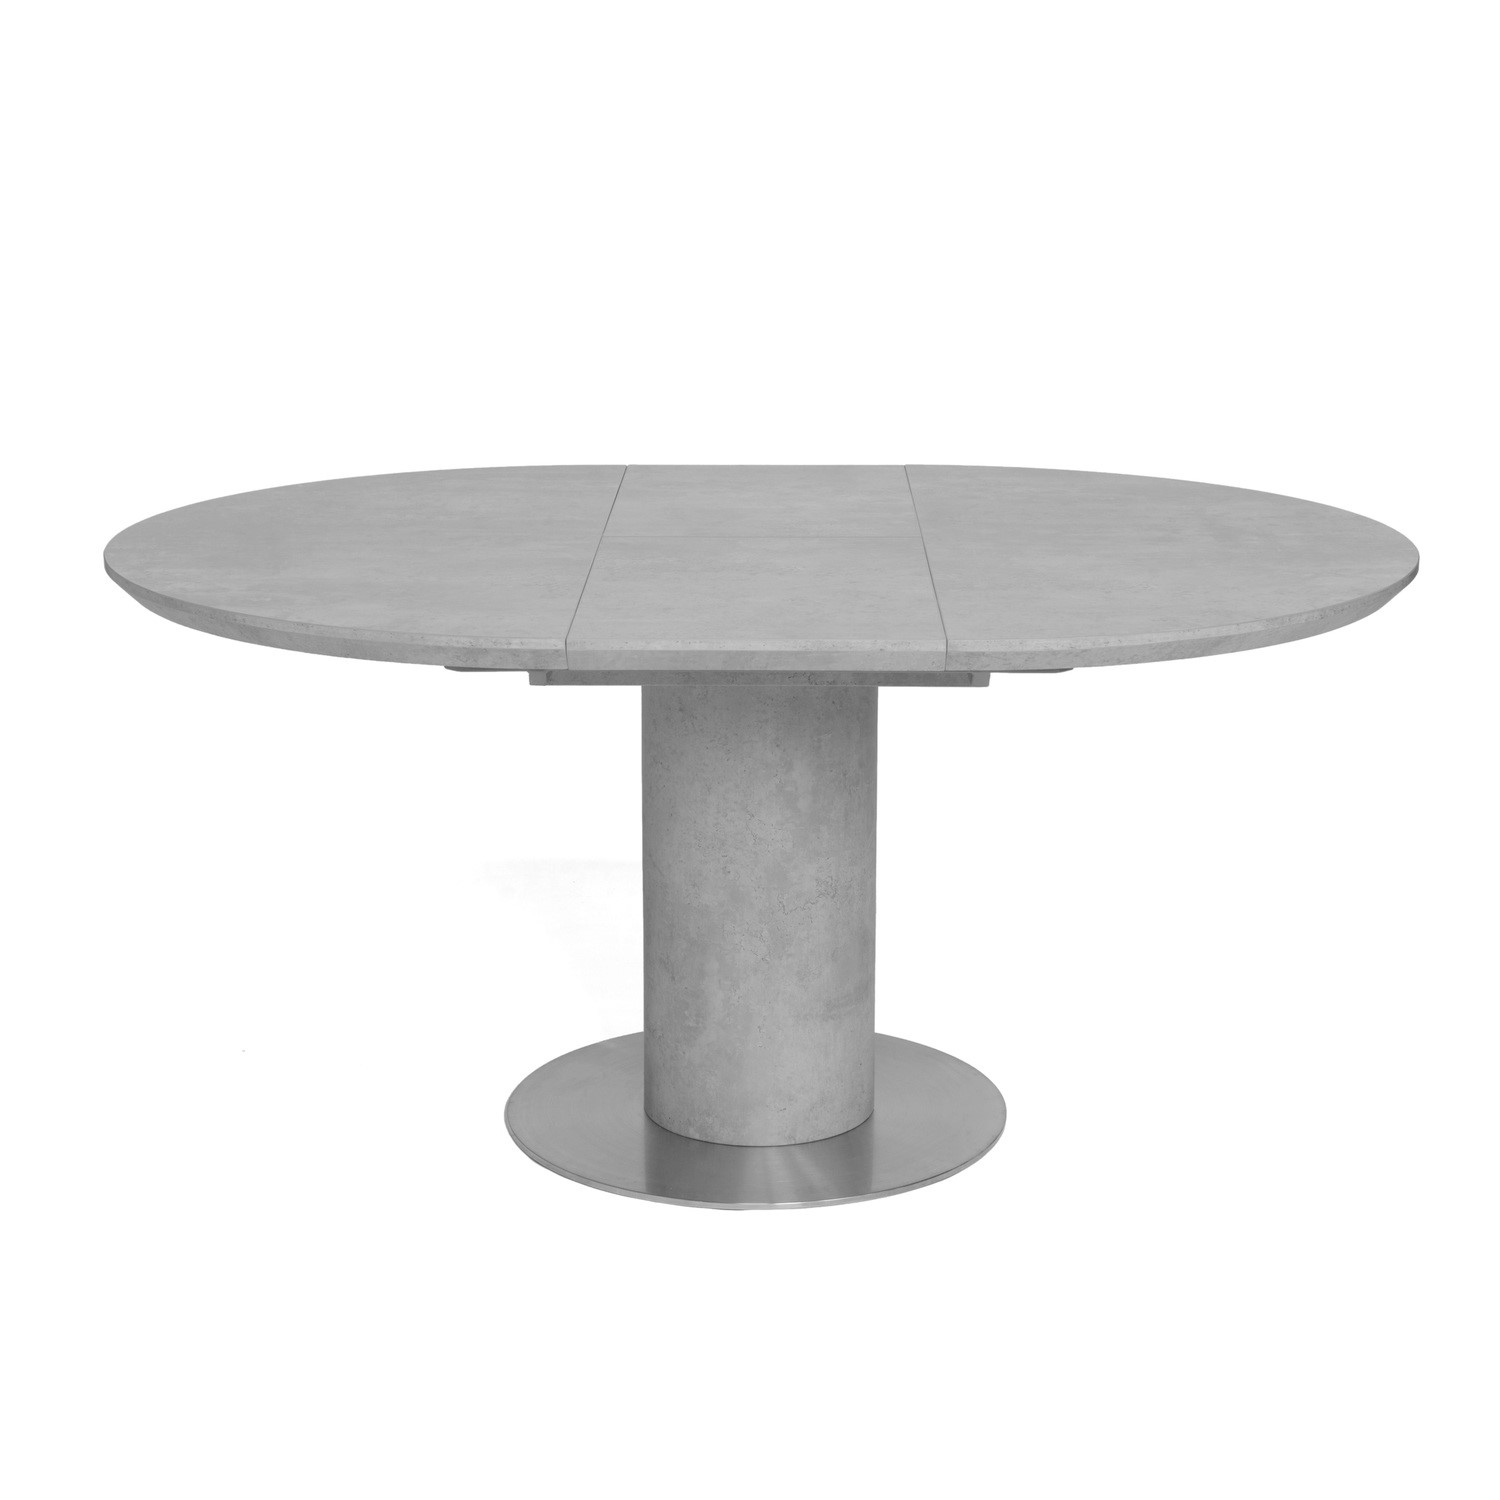 Round Extendable Dining Table In Grey Concrete Effect Etan Furniture123